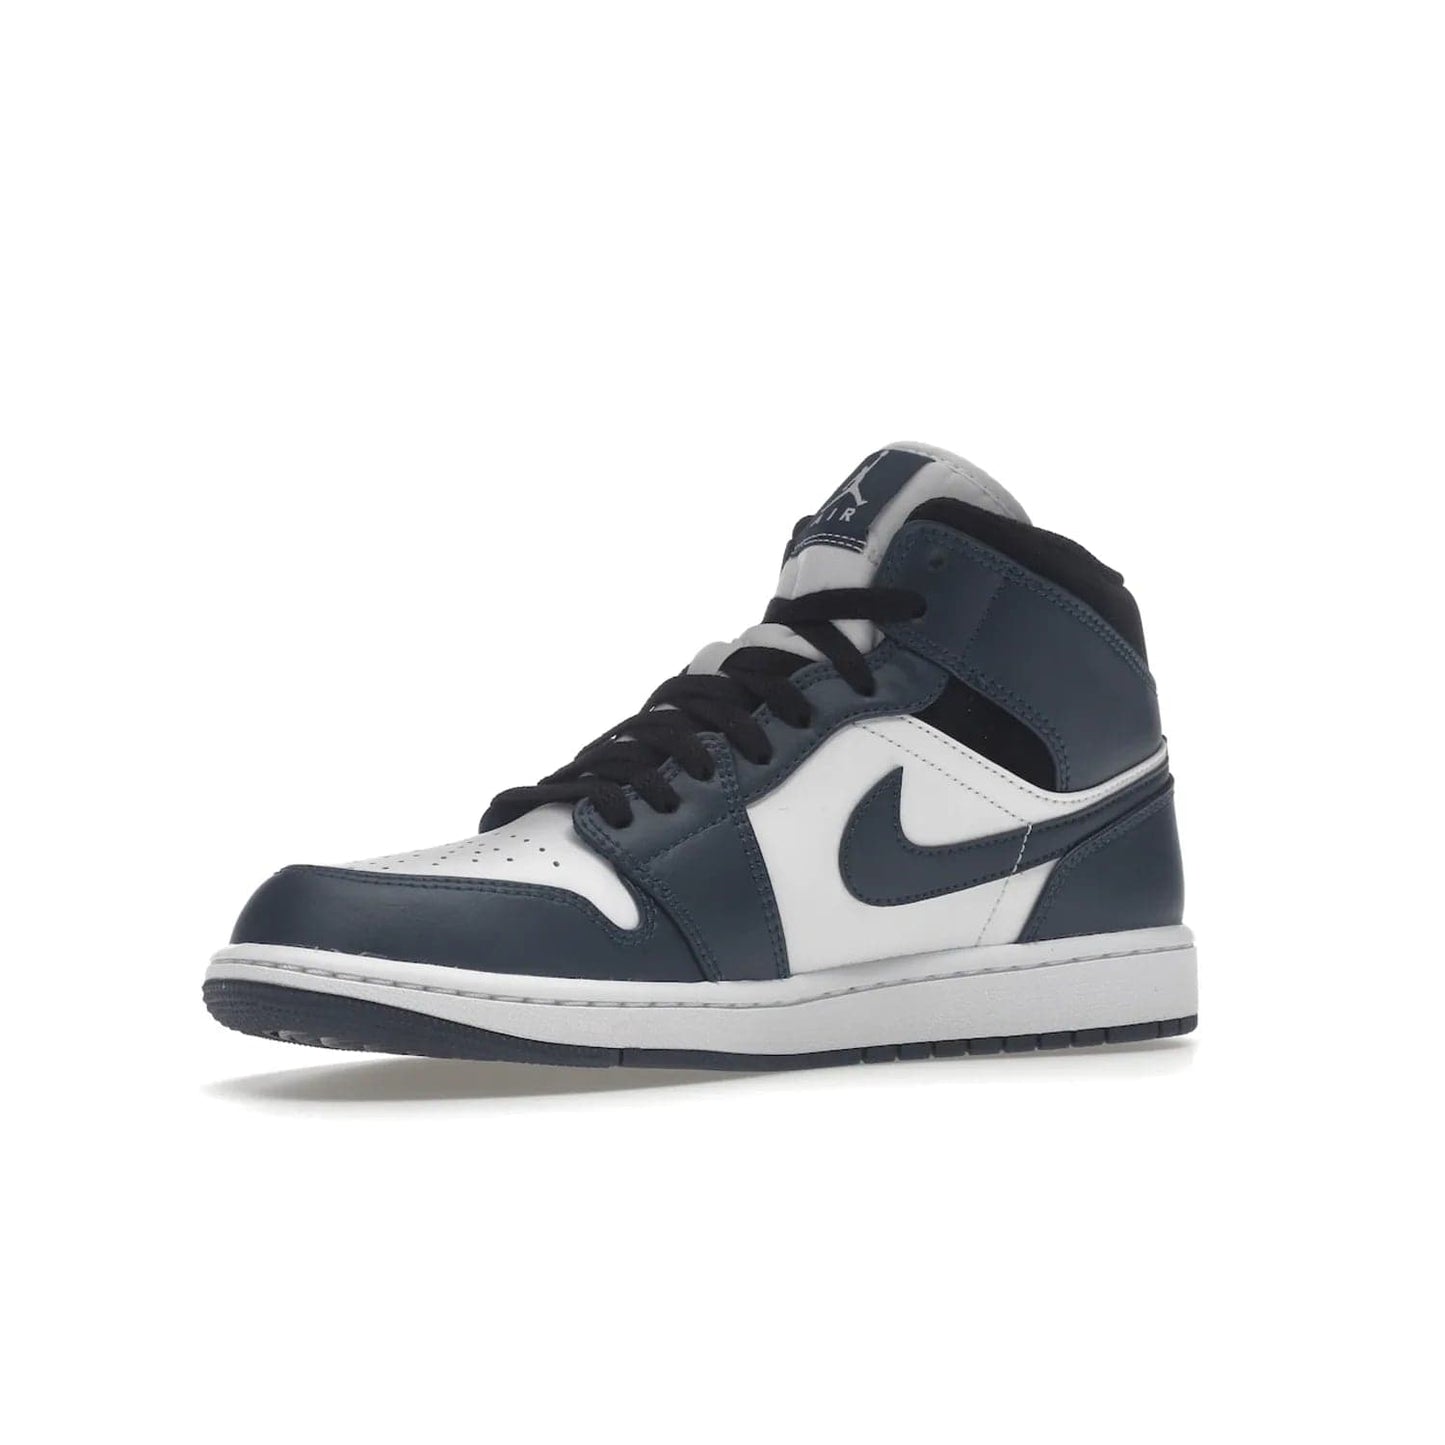 Jordan 1 Mid Armory Navy - Image 16 - Only at www.BallersClubKickz.com - The Jordan 1 Mid Armory Navy: classic basketball sneaker with soft white leather upper, deep navy blue overlays, and black leather ankle detailing. Iconic style with Jordan Wings logo and Jumpman label.